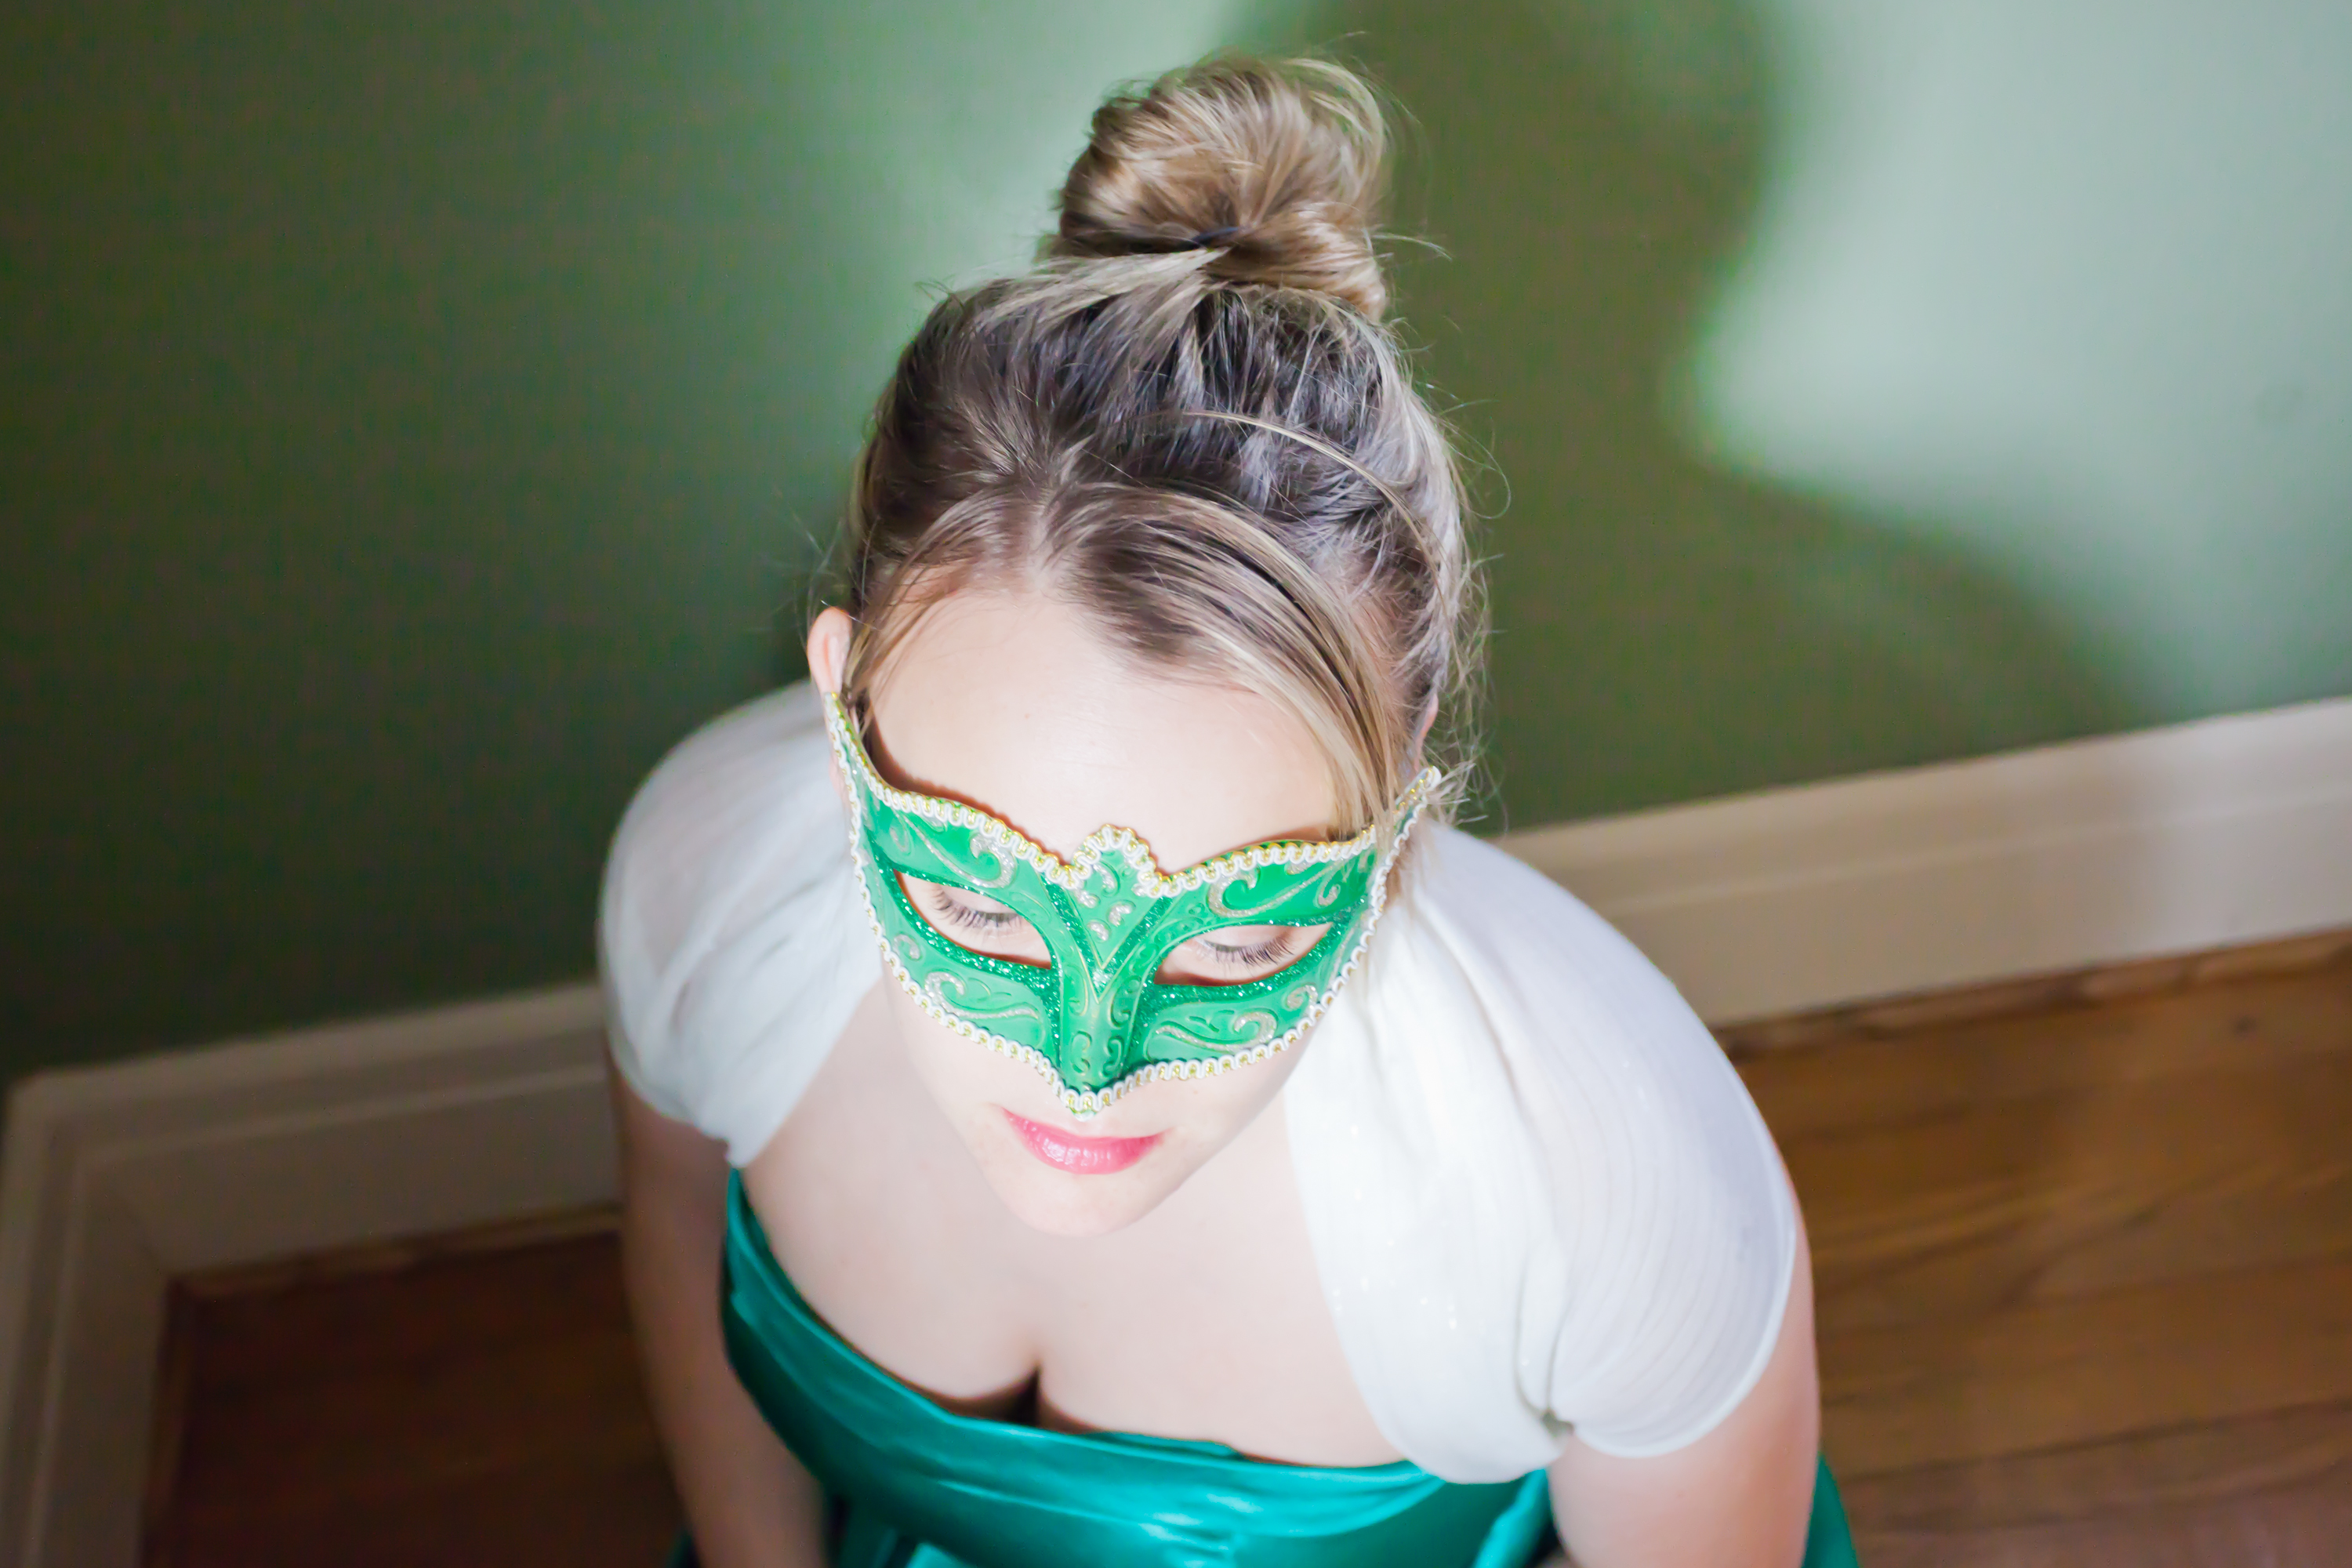 Masquerade Ball Gowns and Masks for any Party or Event